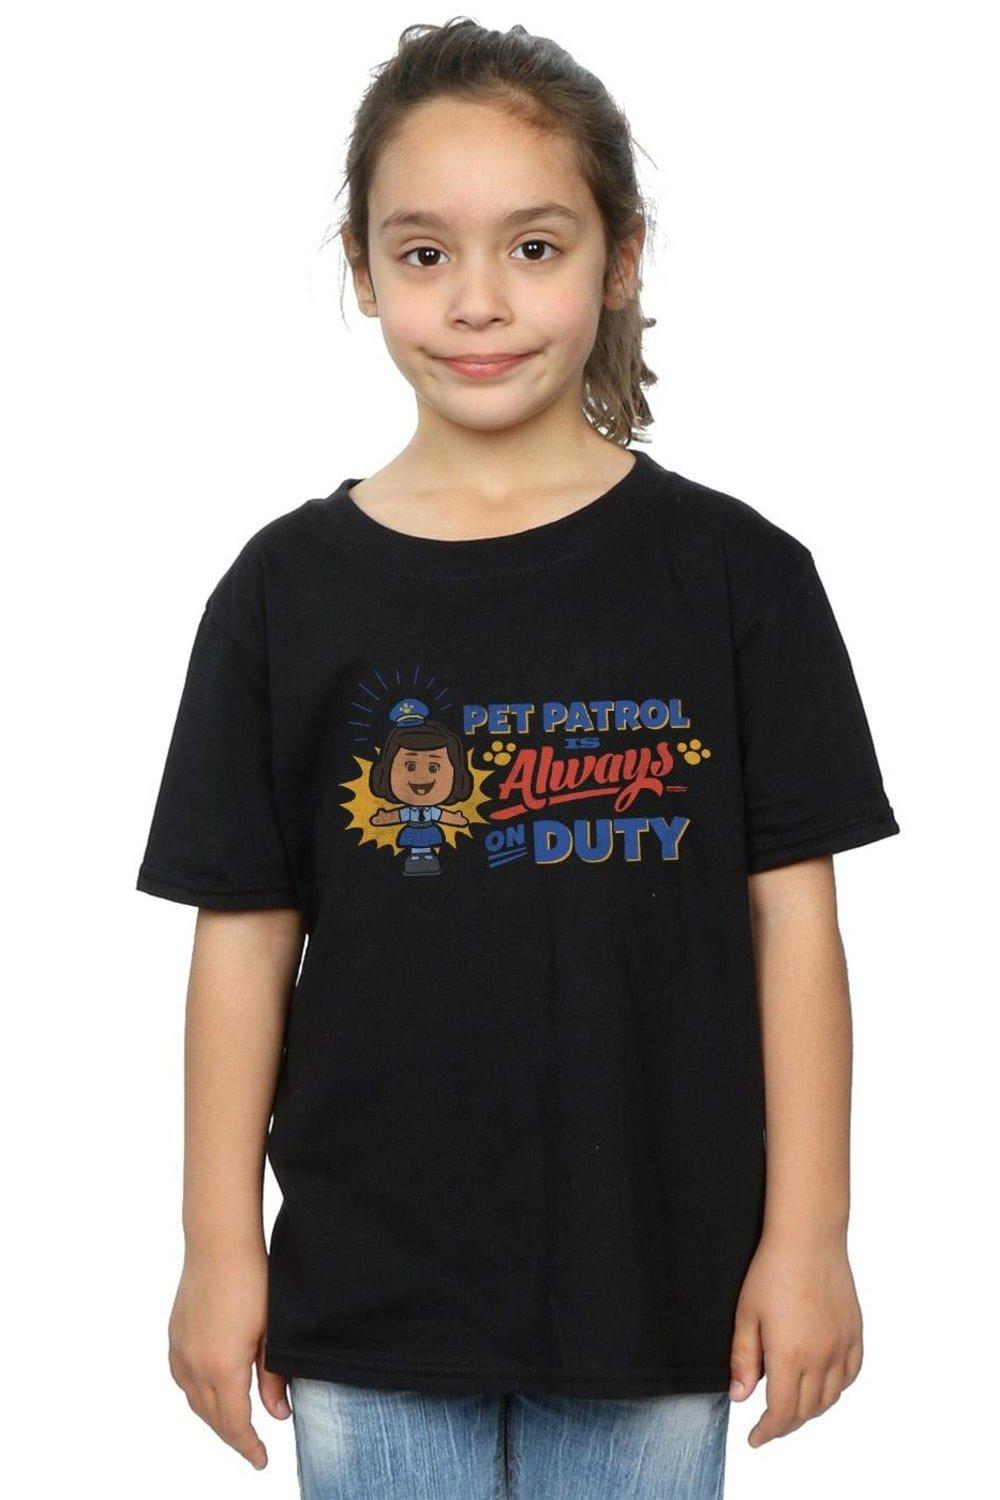 Toy Story 4 Giggle McDimples Pet Patrol Cotton T-Shirt